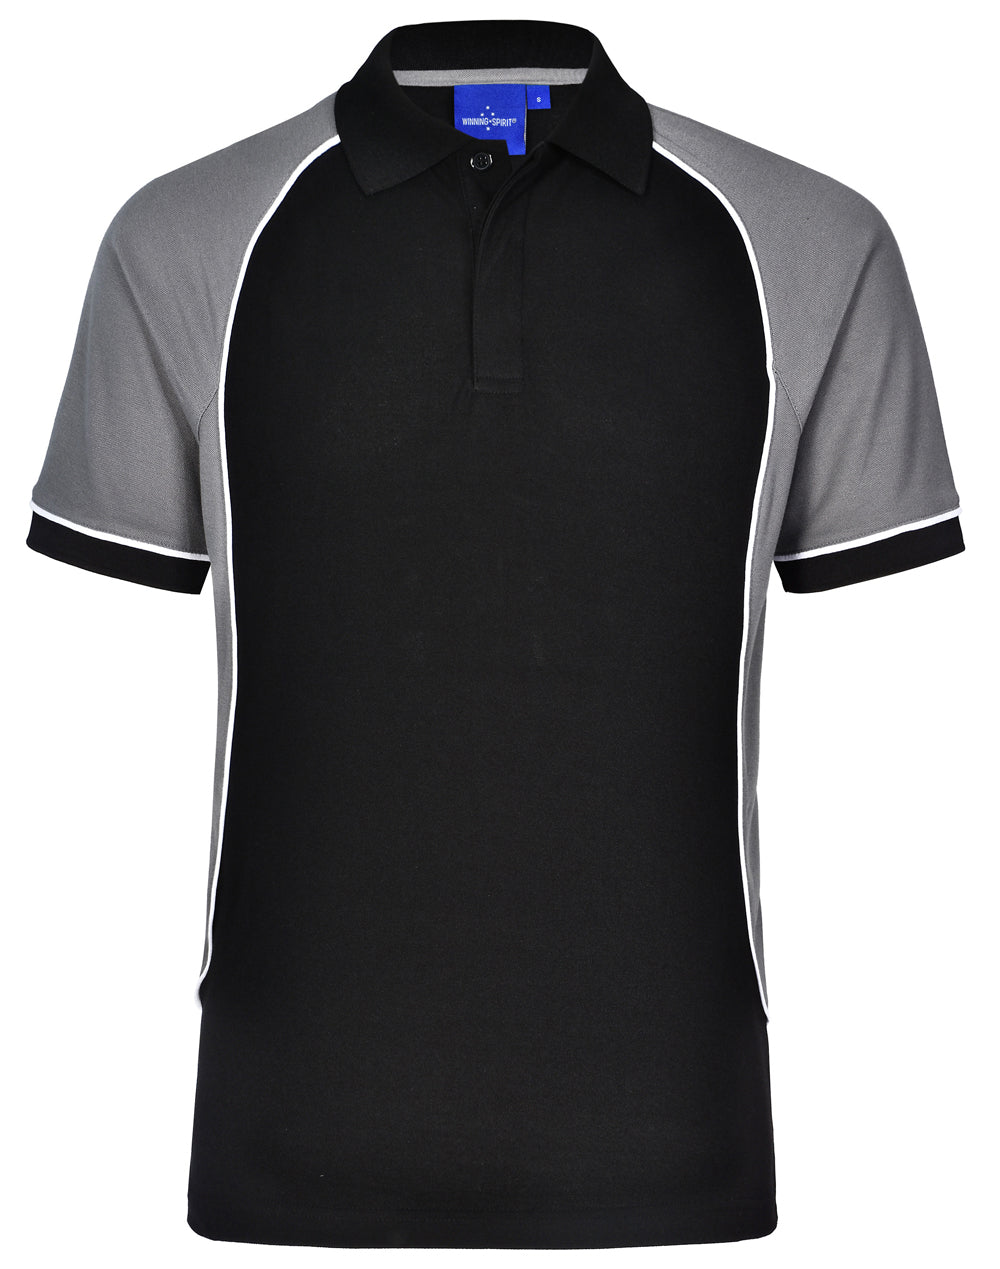 Tri Colour Mens Short Sleeve Polo - made by AIW